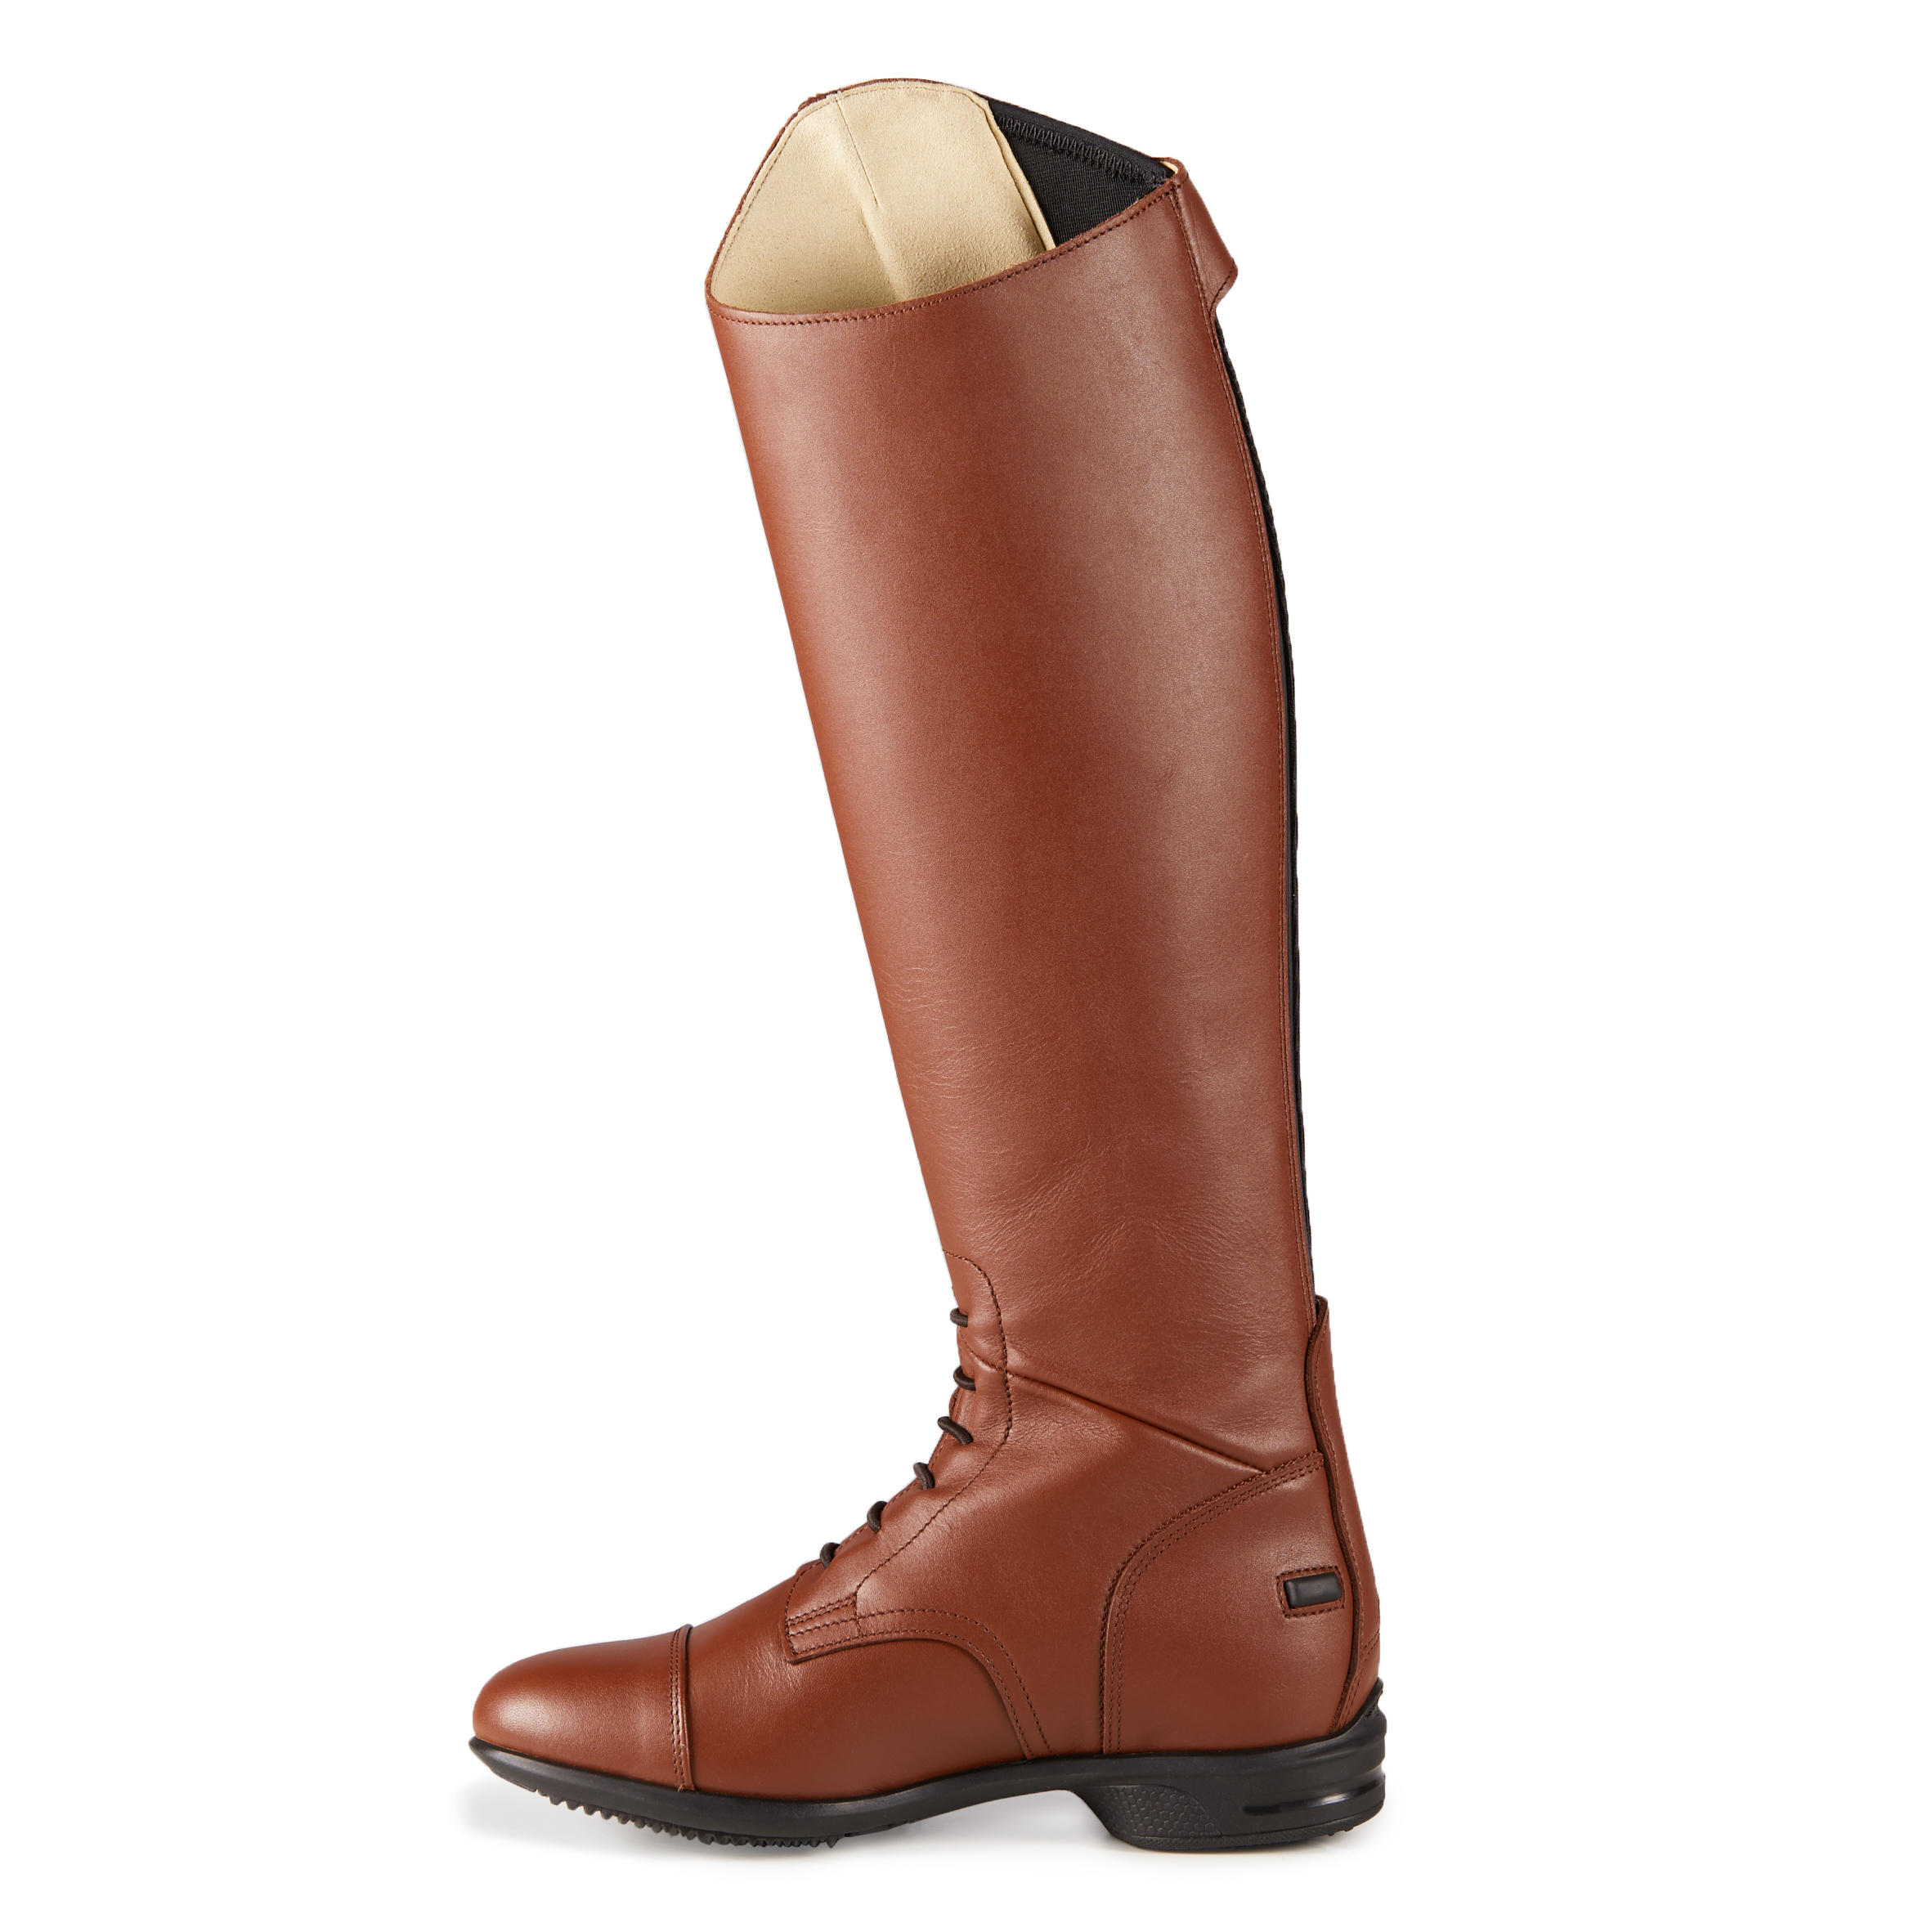 900 Jump M Adult Horse Riding Leather Long Boots - Brown 7/16